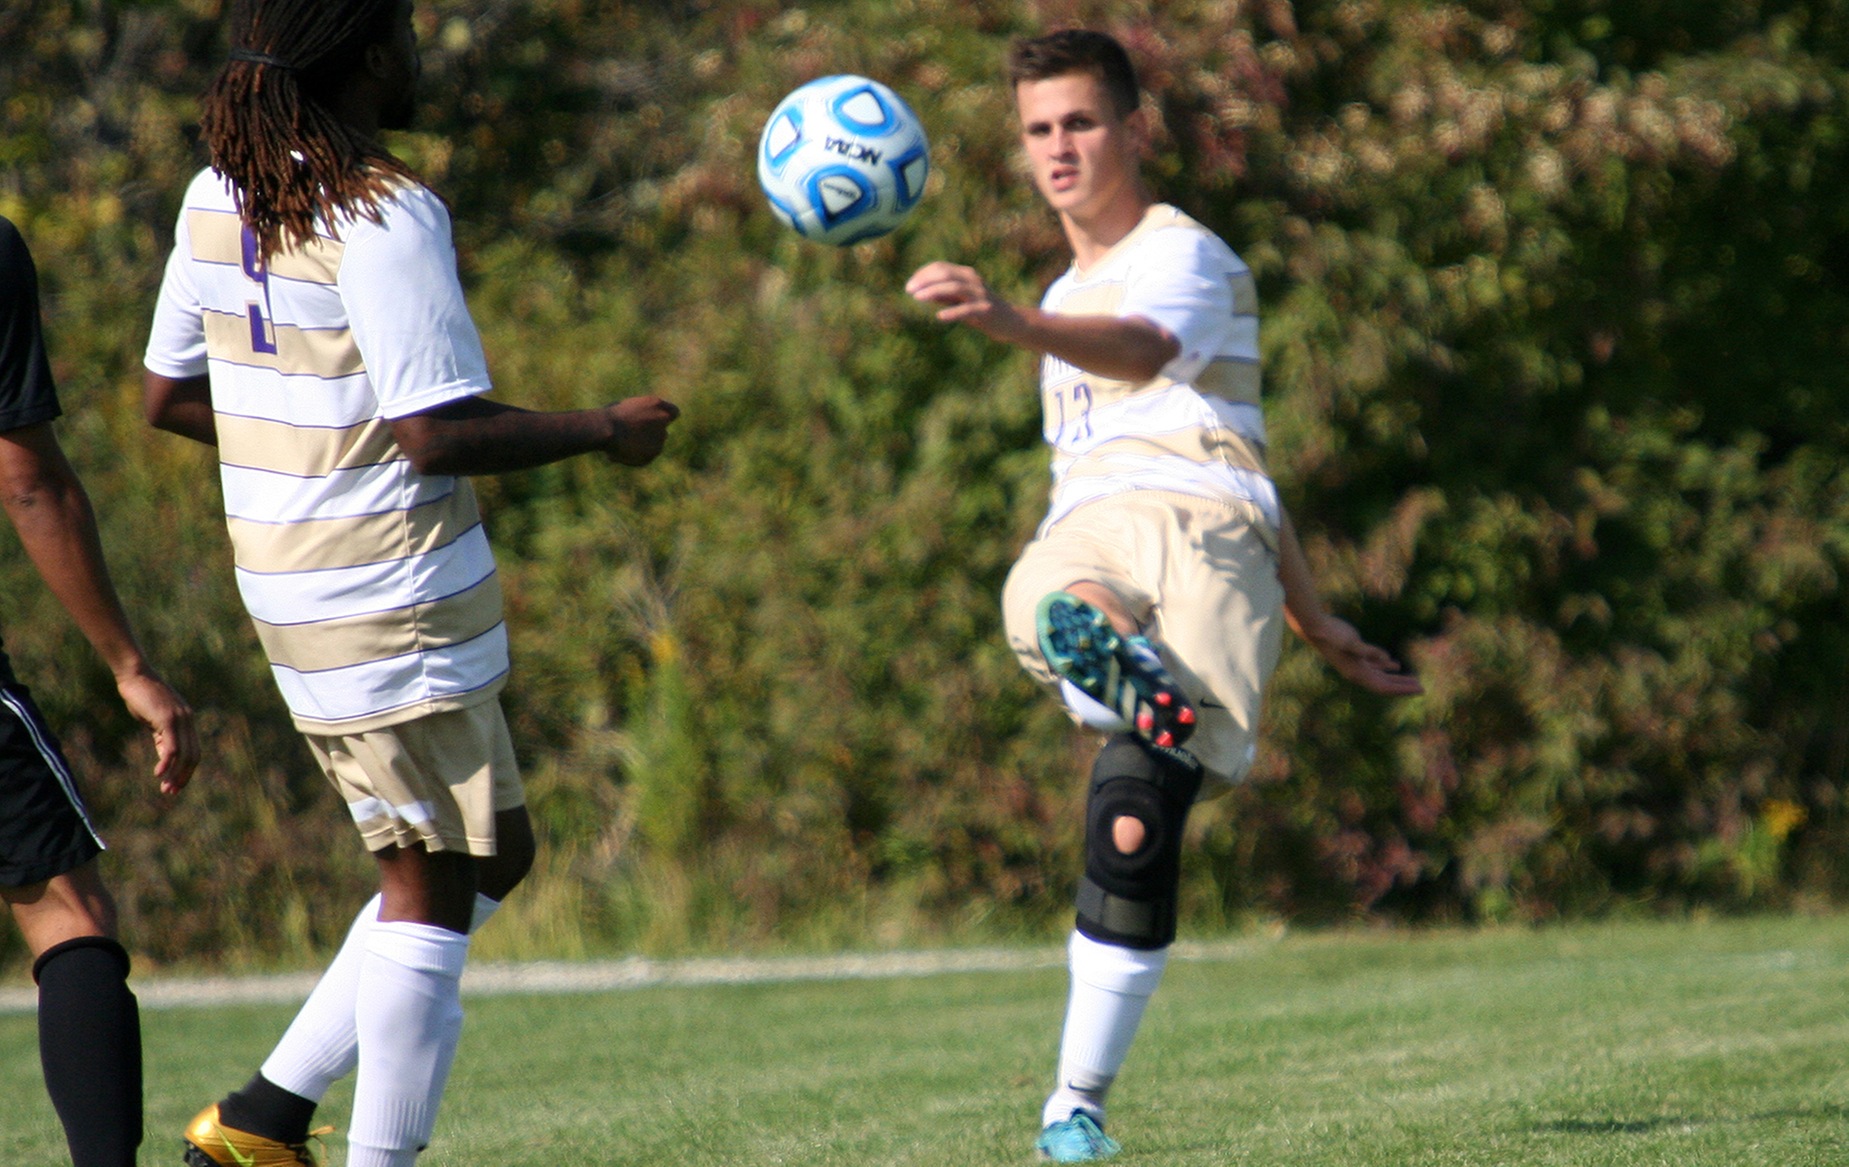 Defiance College Wins First Game of Classic